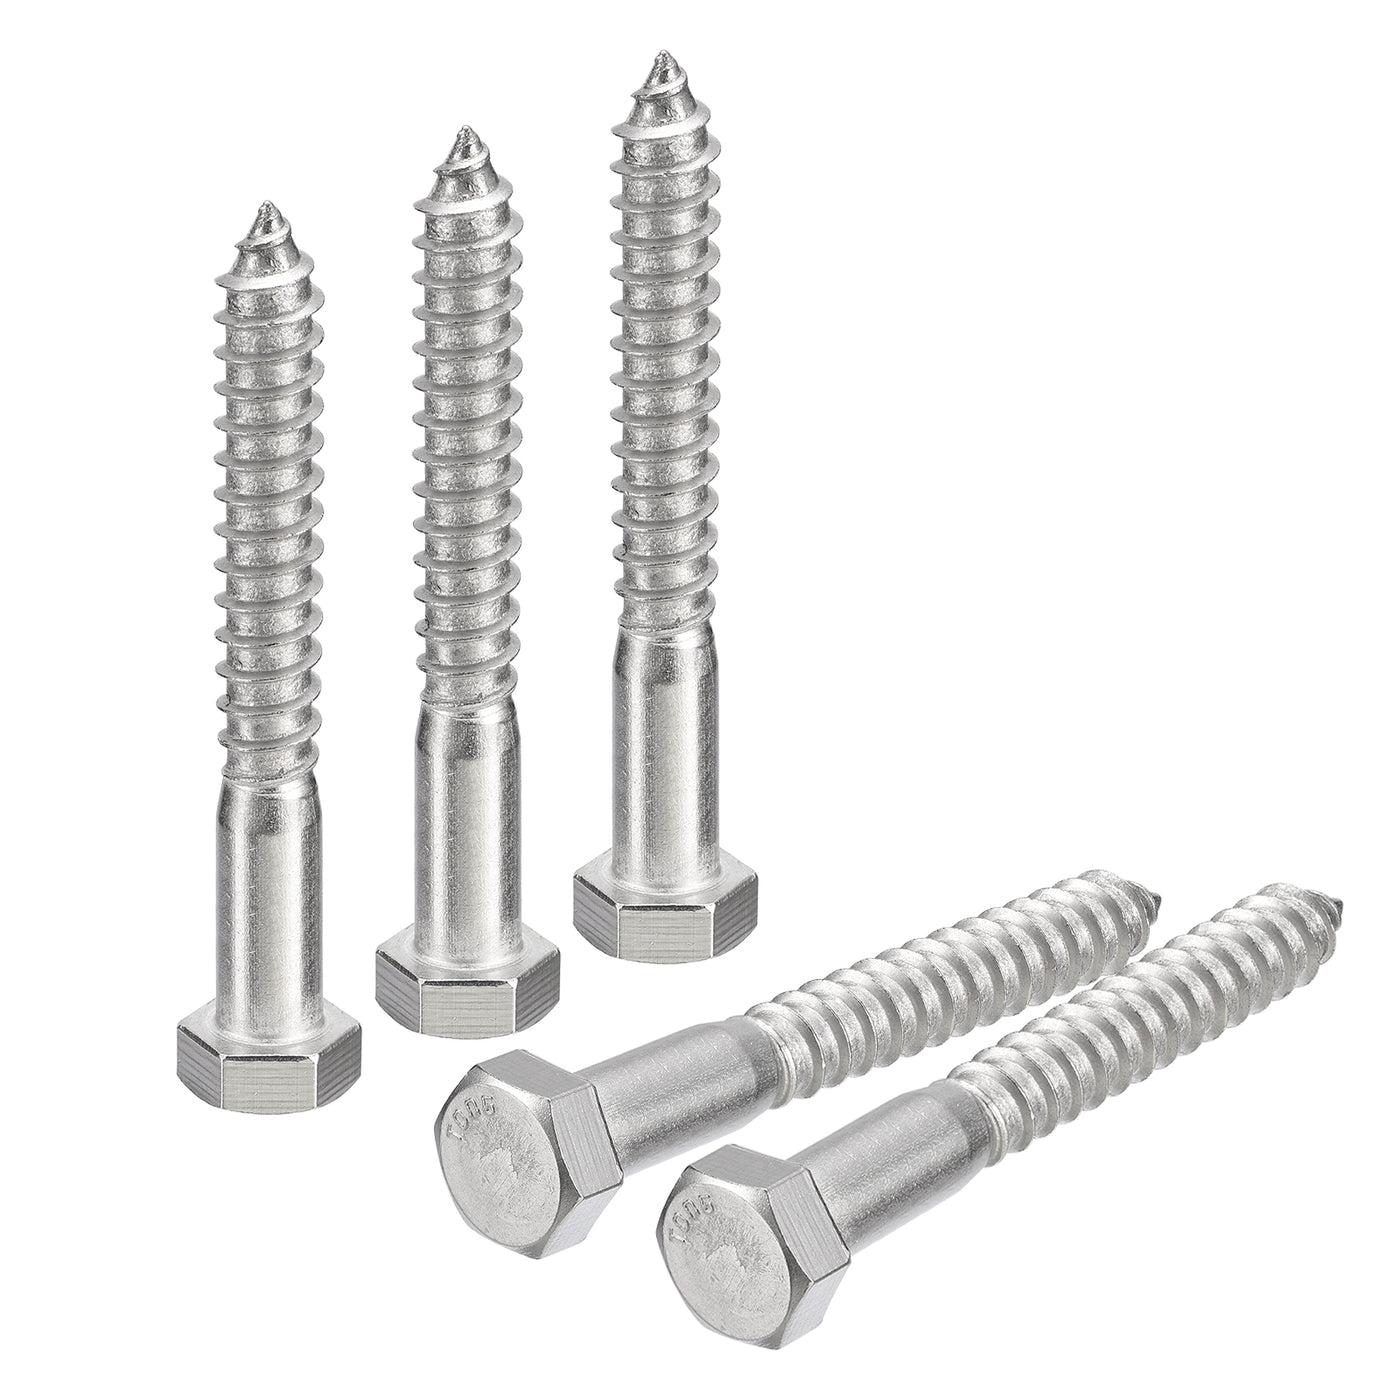 uxcell Uxcell Hex Head Lag Screws Bolts, 5pcs 1/2" x 4" 304 Stainless Steel Wood Screws